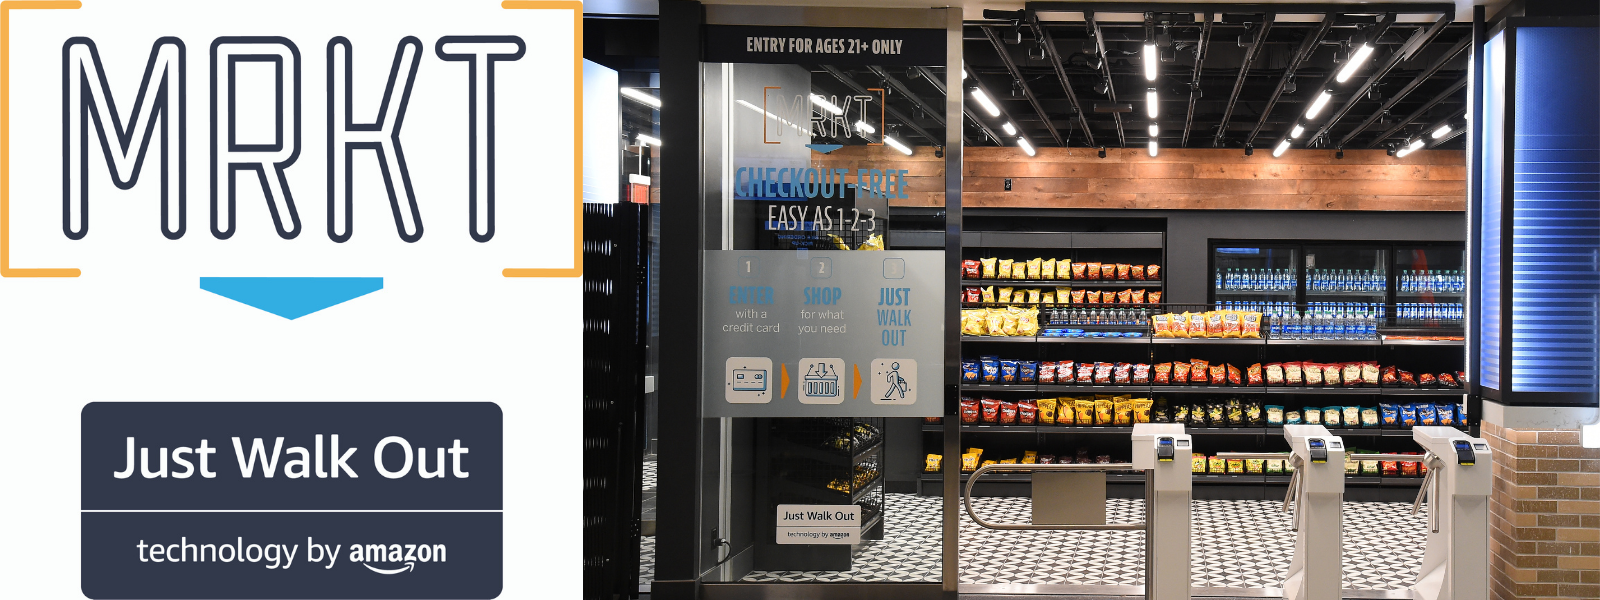 TD Garden Introduces MRKT Powered by Amazon's Just Walk Out Technology